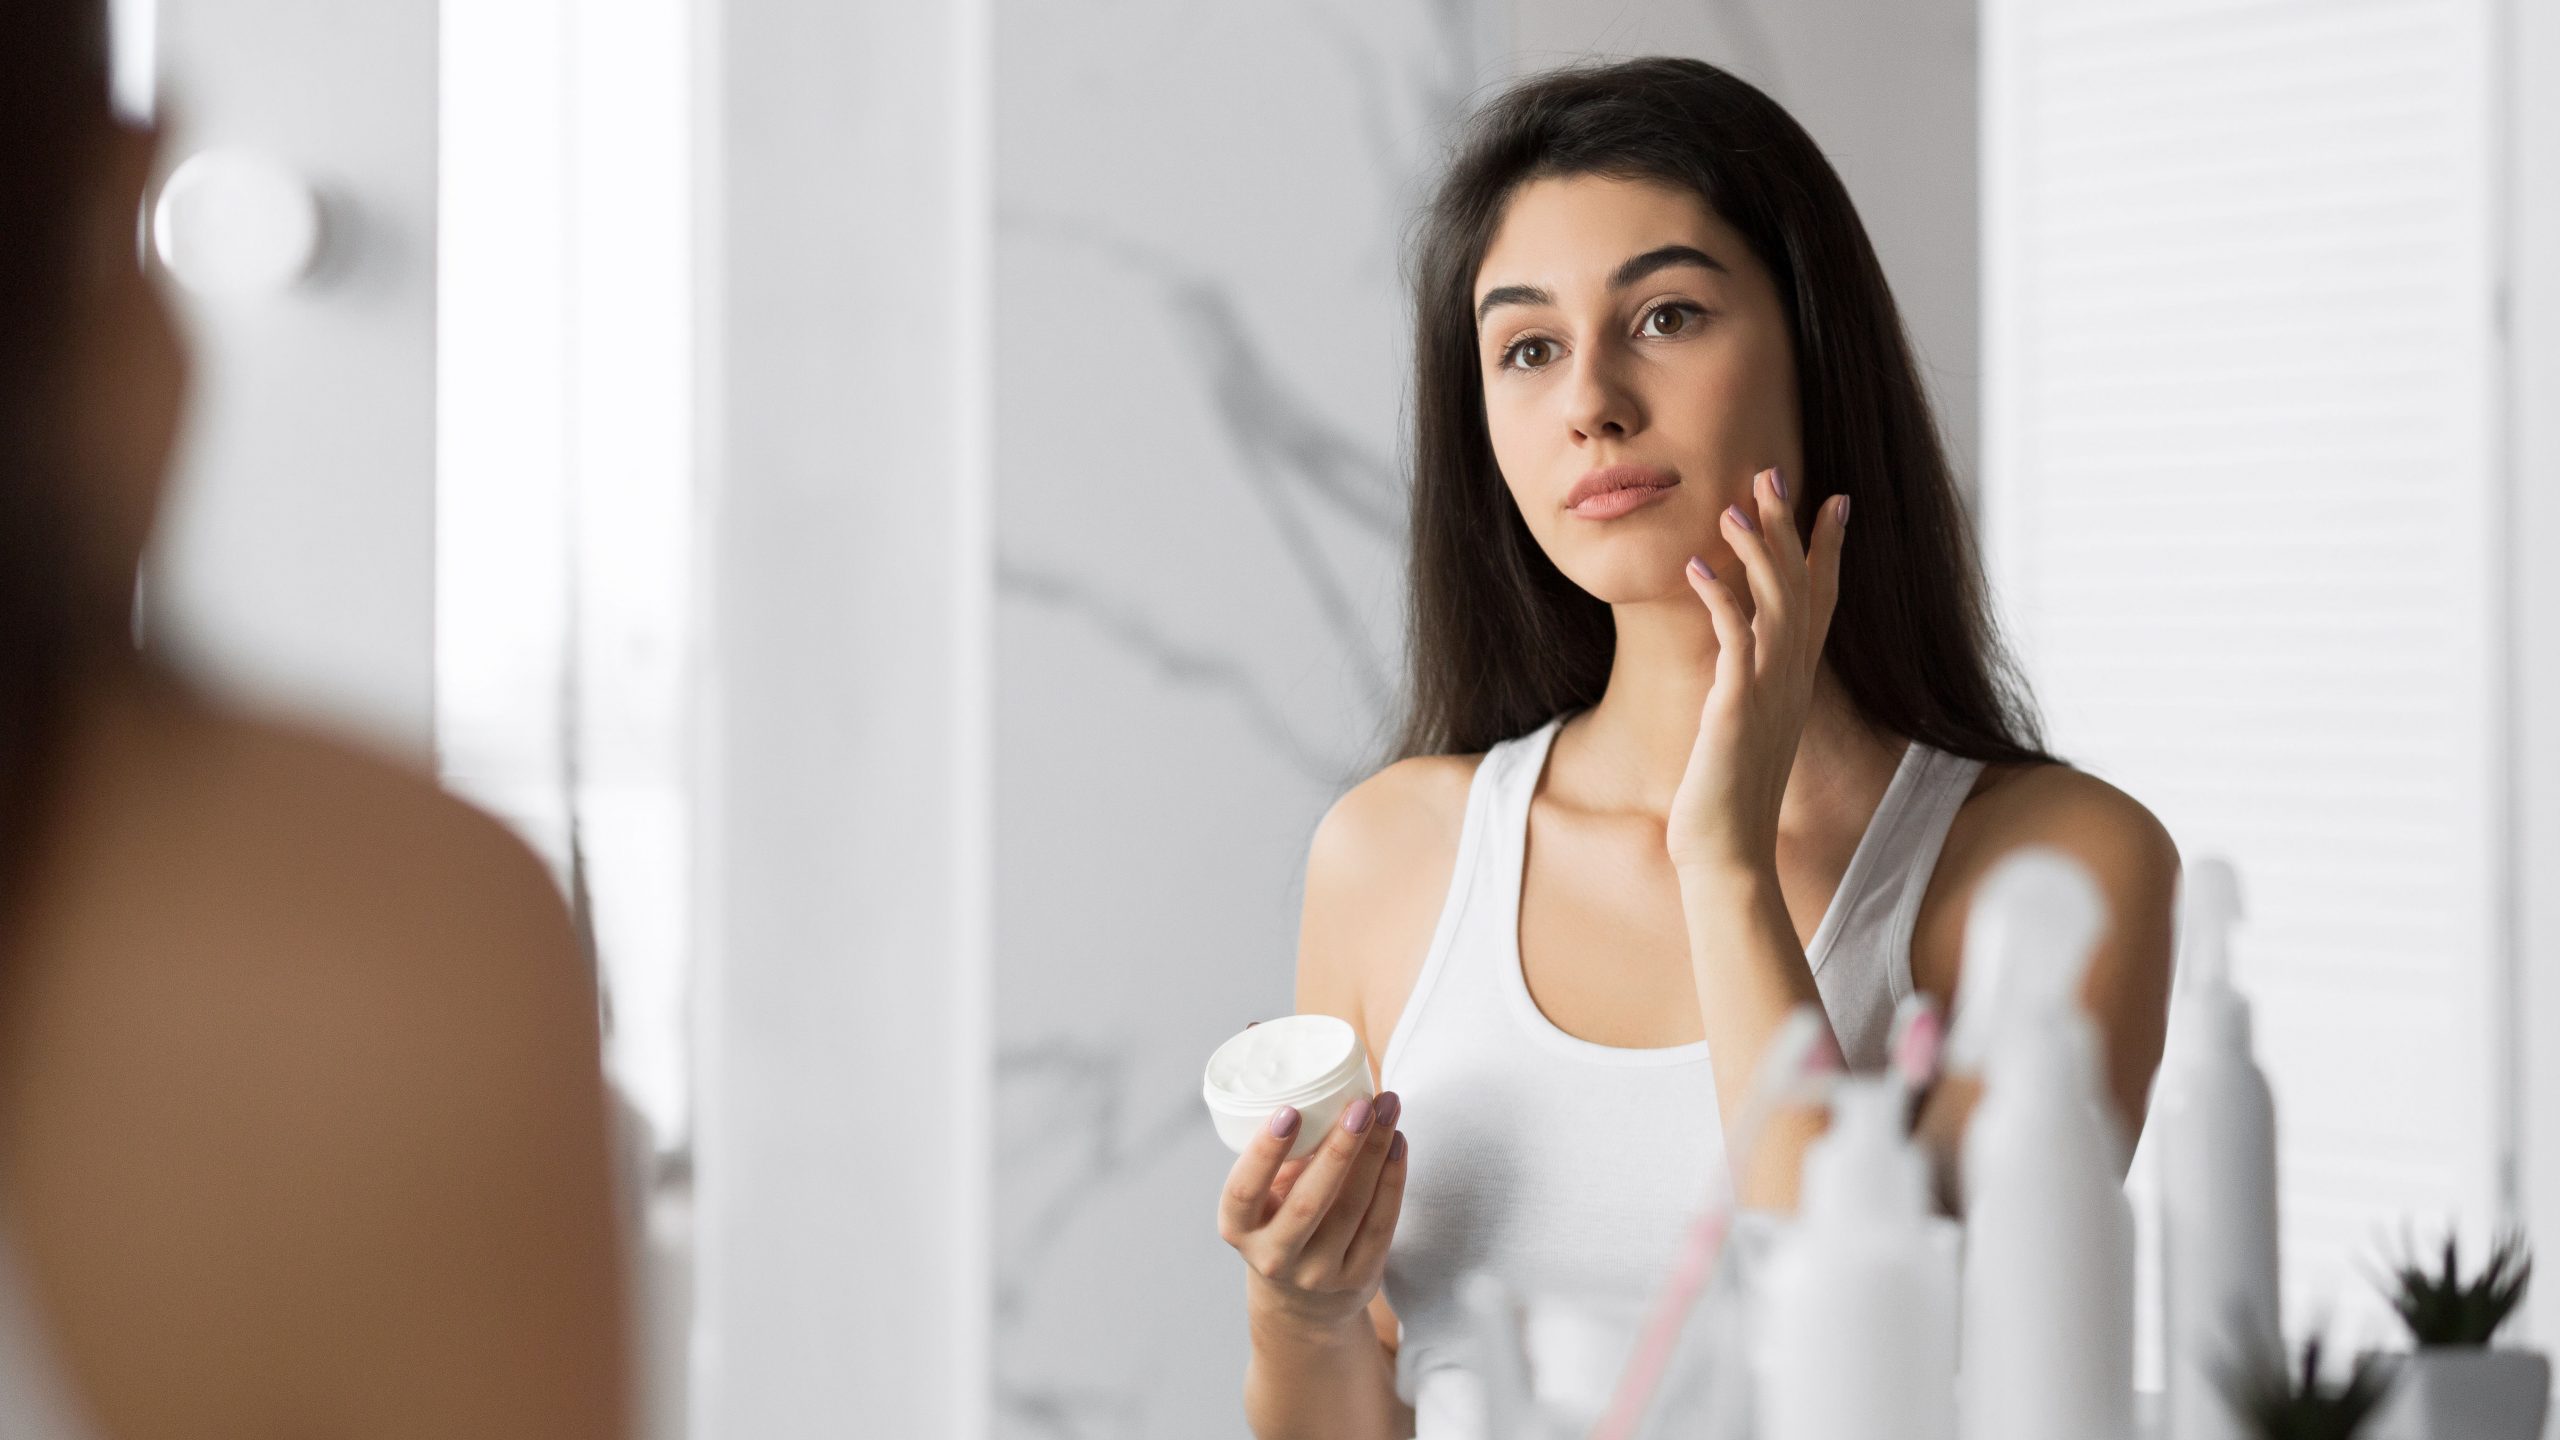 These 5 simple habits are a must for a healthy skincare routine